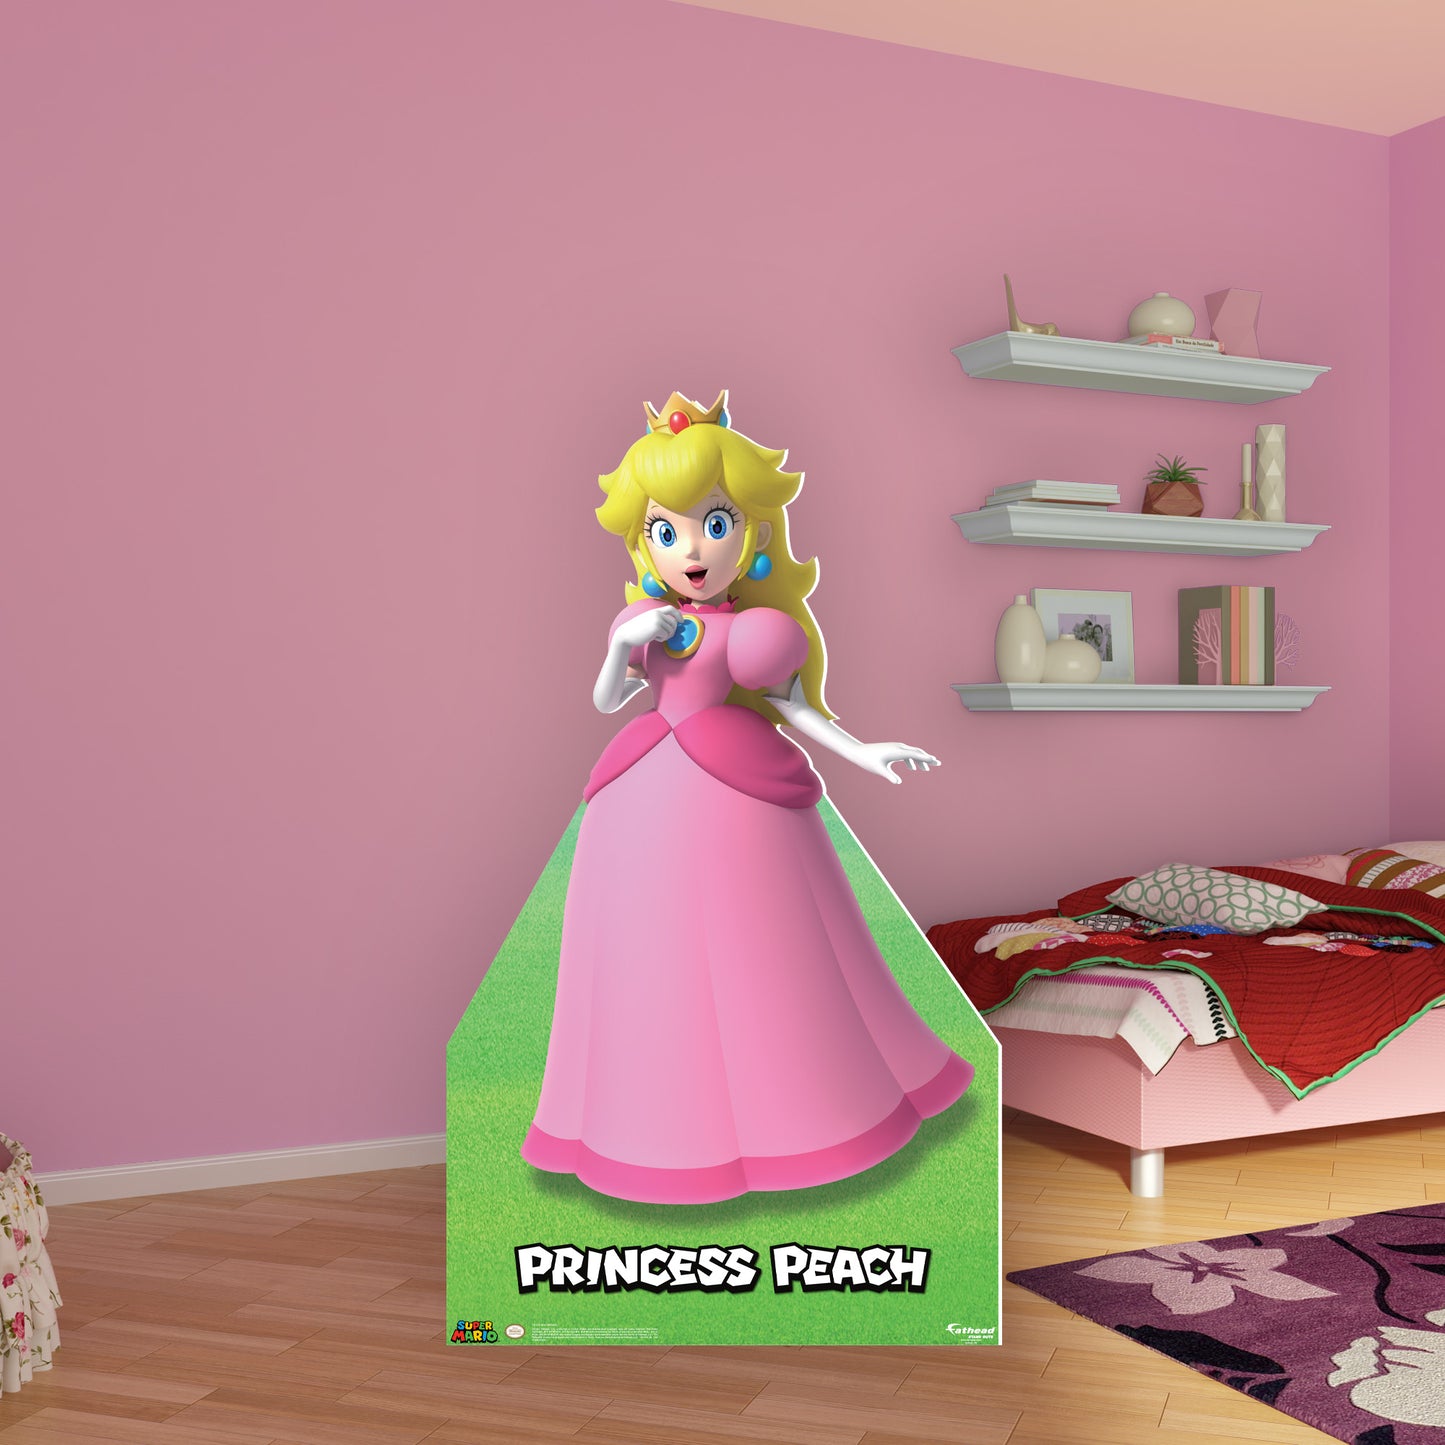 Super Mario: Princess Peach Life-Size Foam Core Cutout - Officially Licensed Nintendo Stand Out